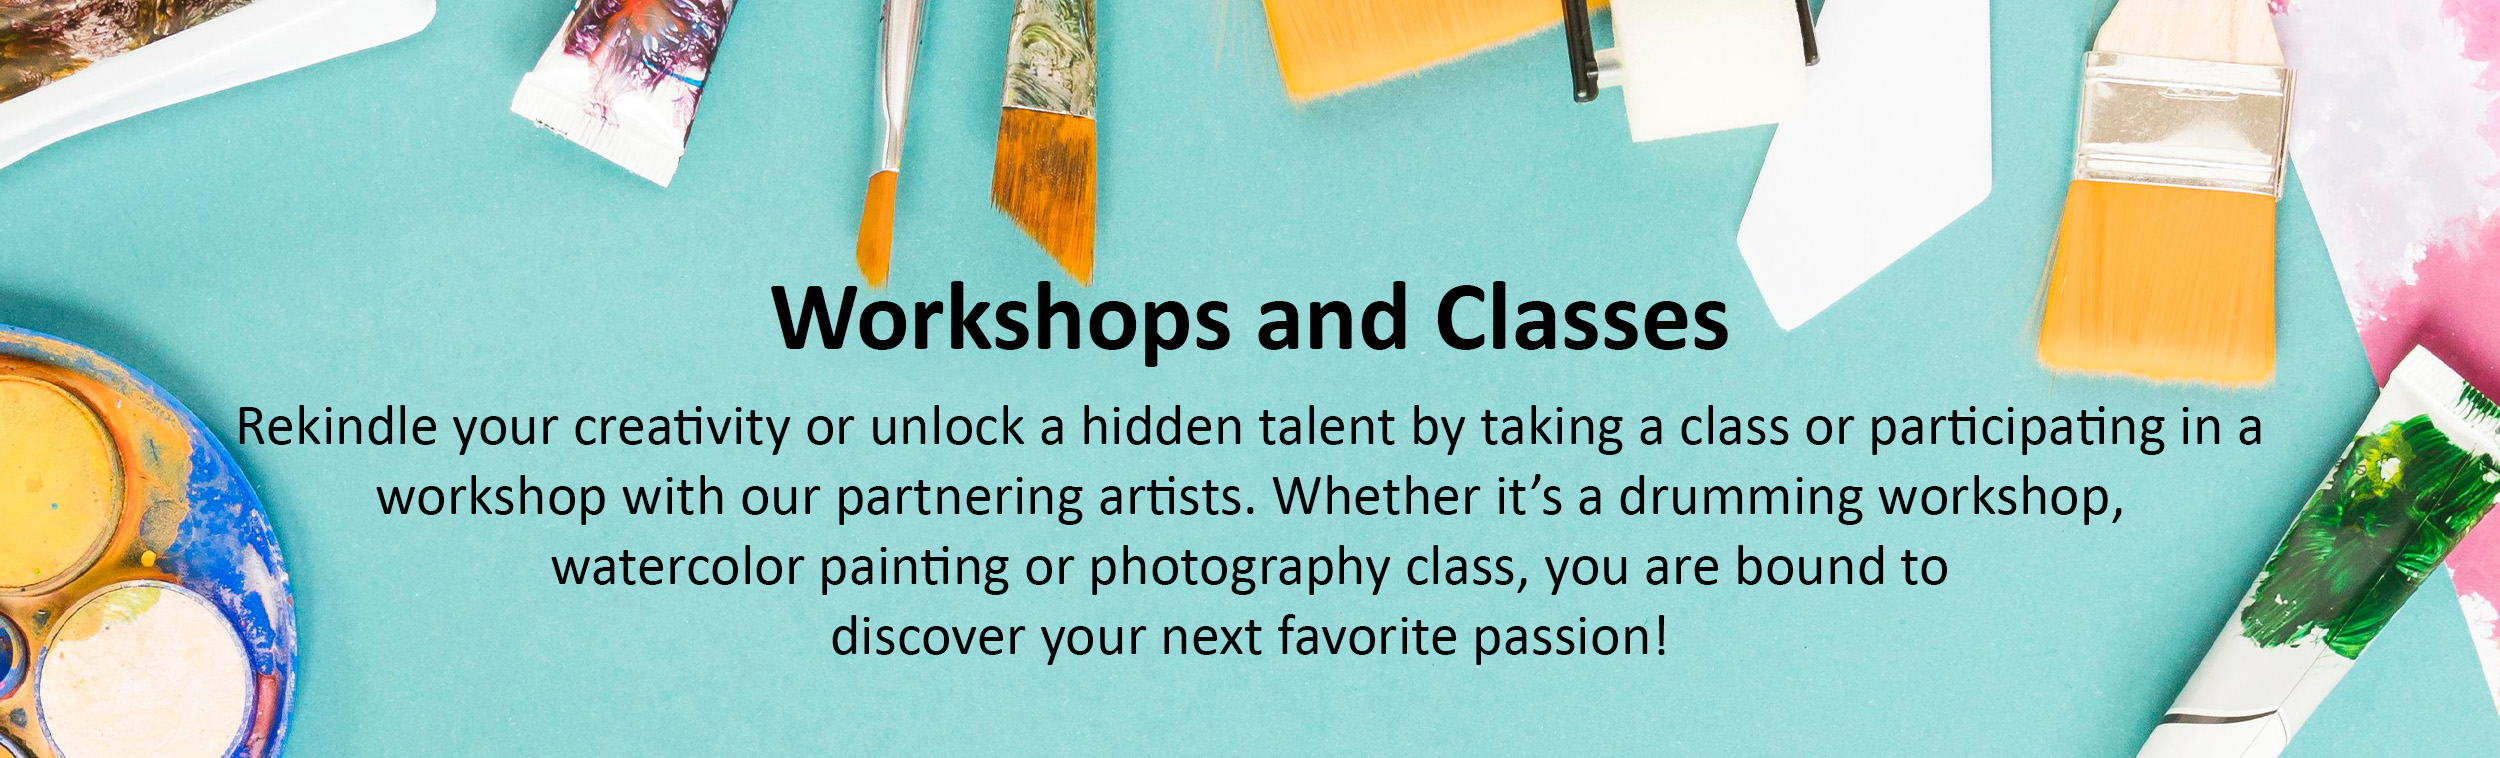 Workshops and Classes  Rekindle your creativity or unlock a hidden talent by taking a class or participating in a workshop with our partnering artists. Whether it’s a drumming workshop, watercolor painting, or photography class, you are bound to discover your next favorite passion!